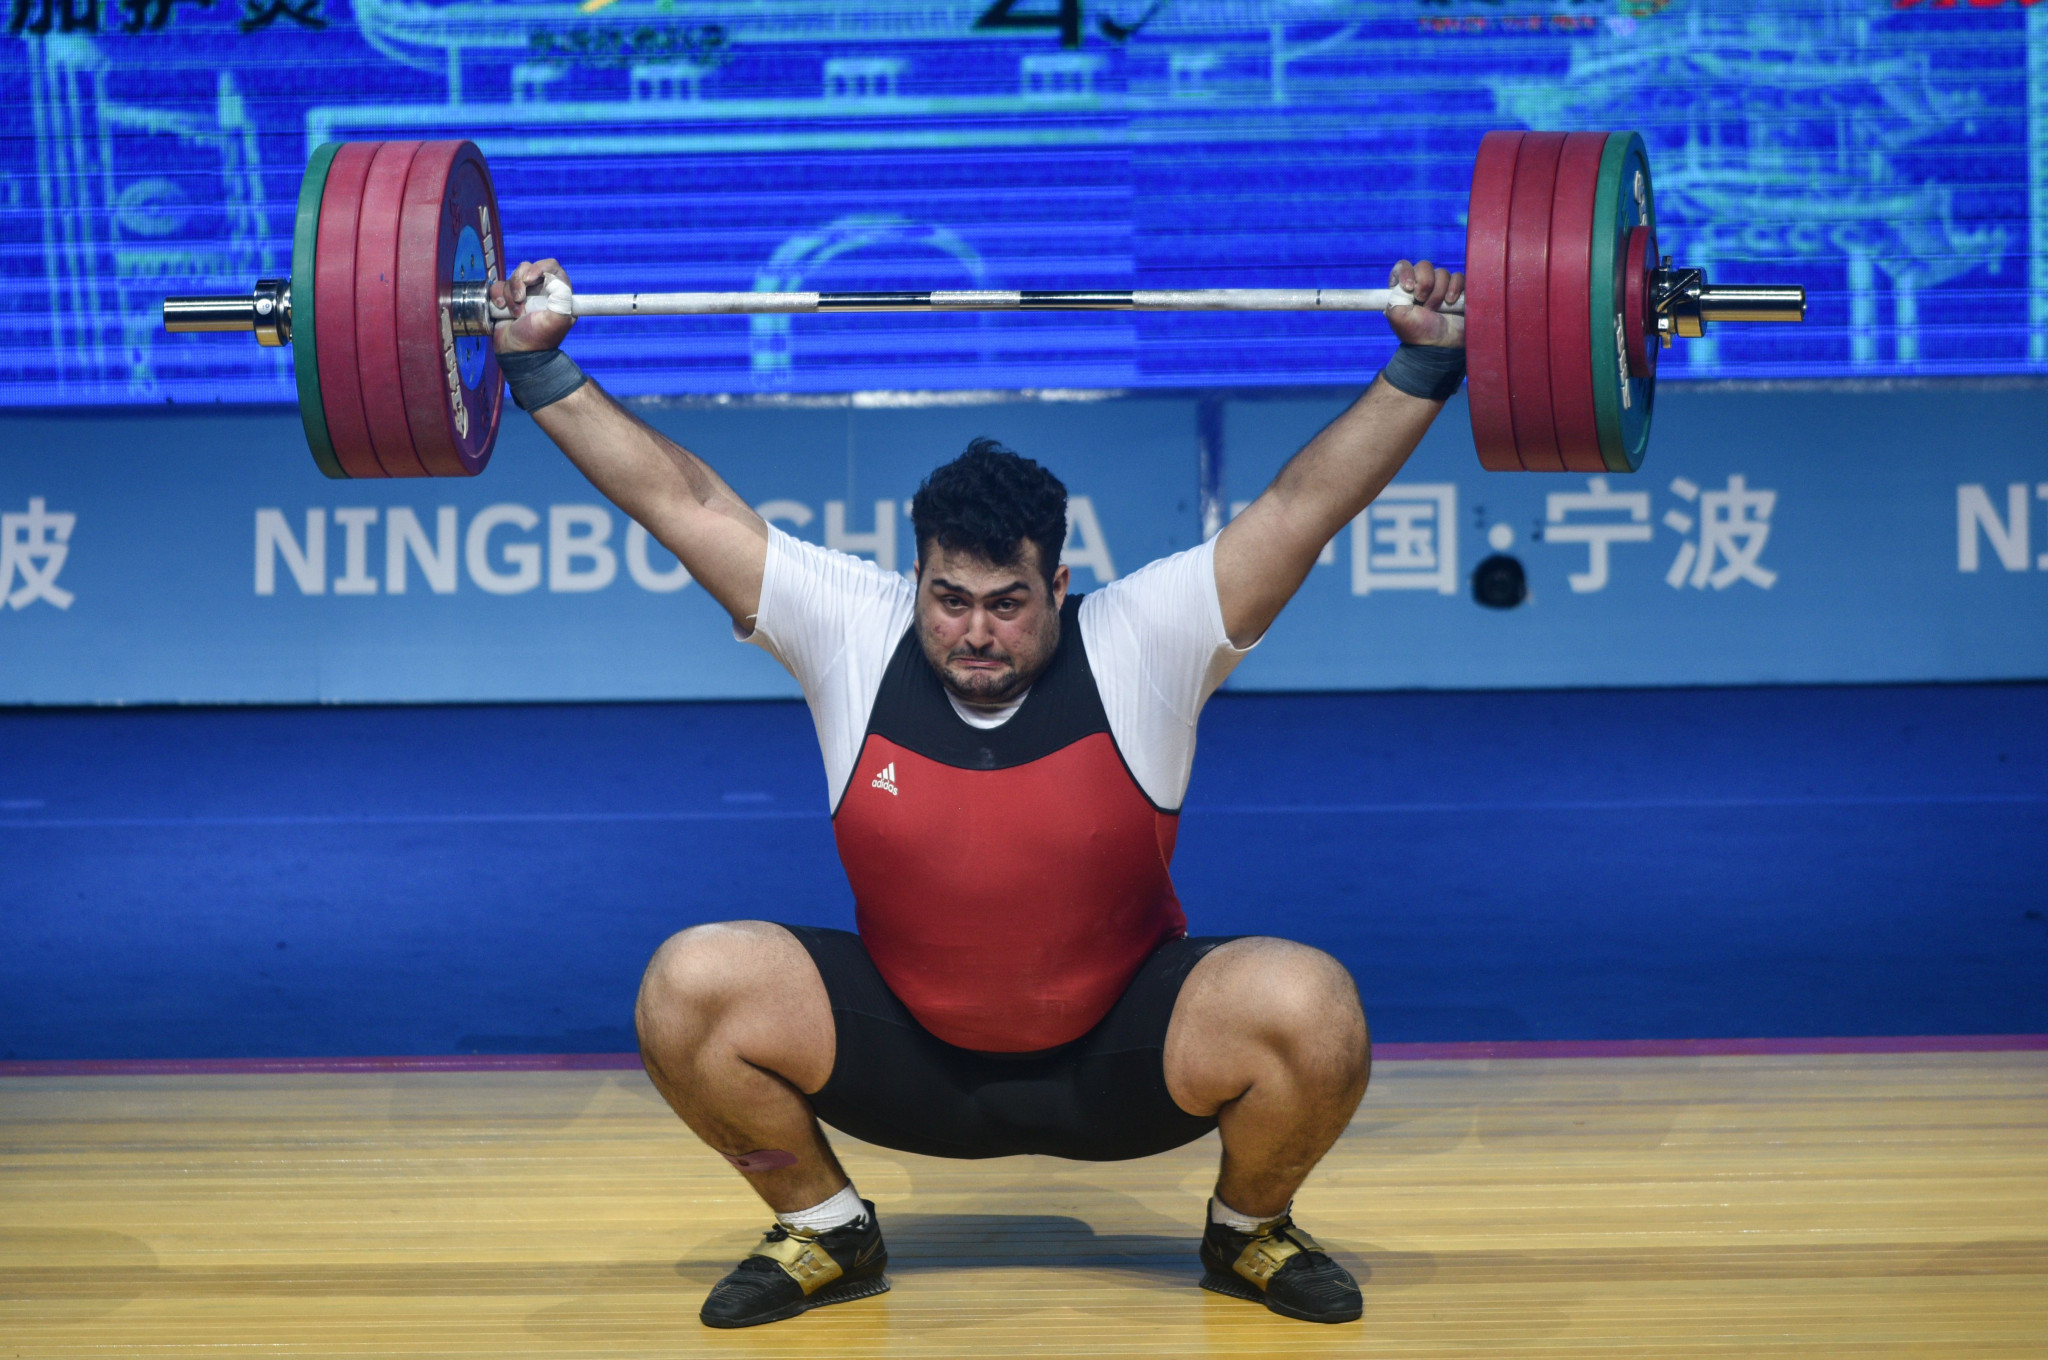 This year's Asian Weightlifting Championships were held in Ningbo in China ©Getty Images